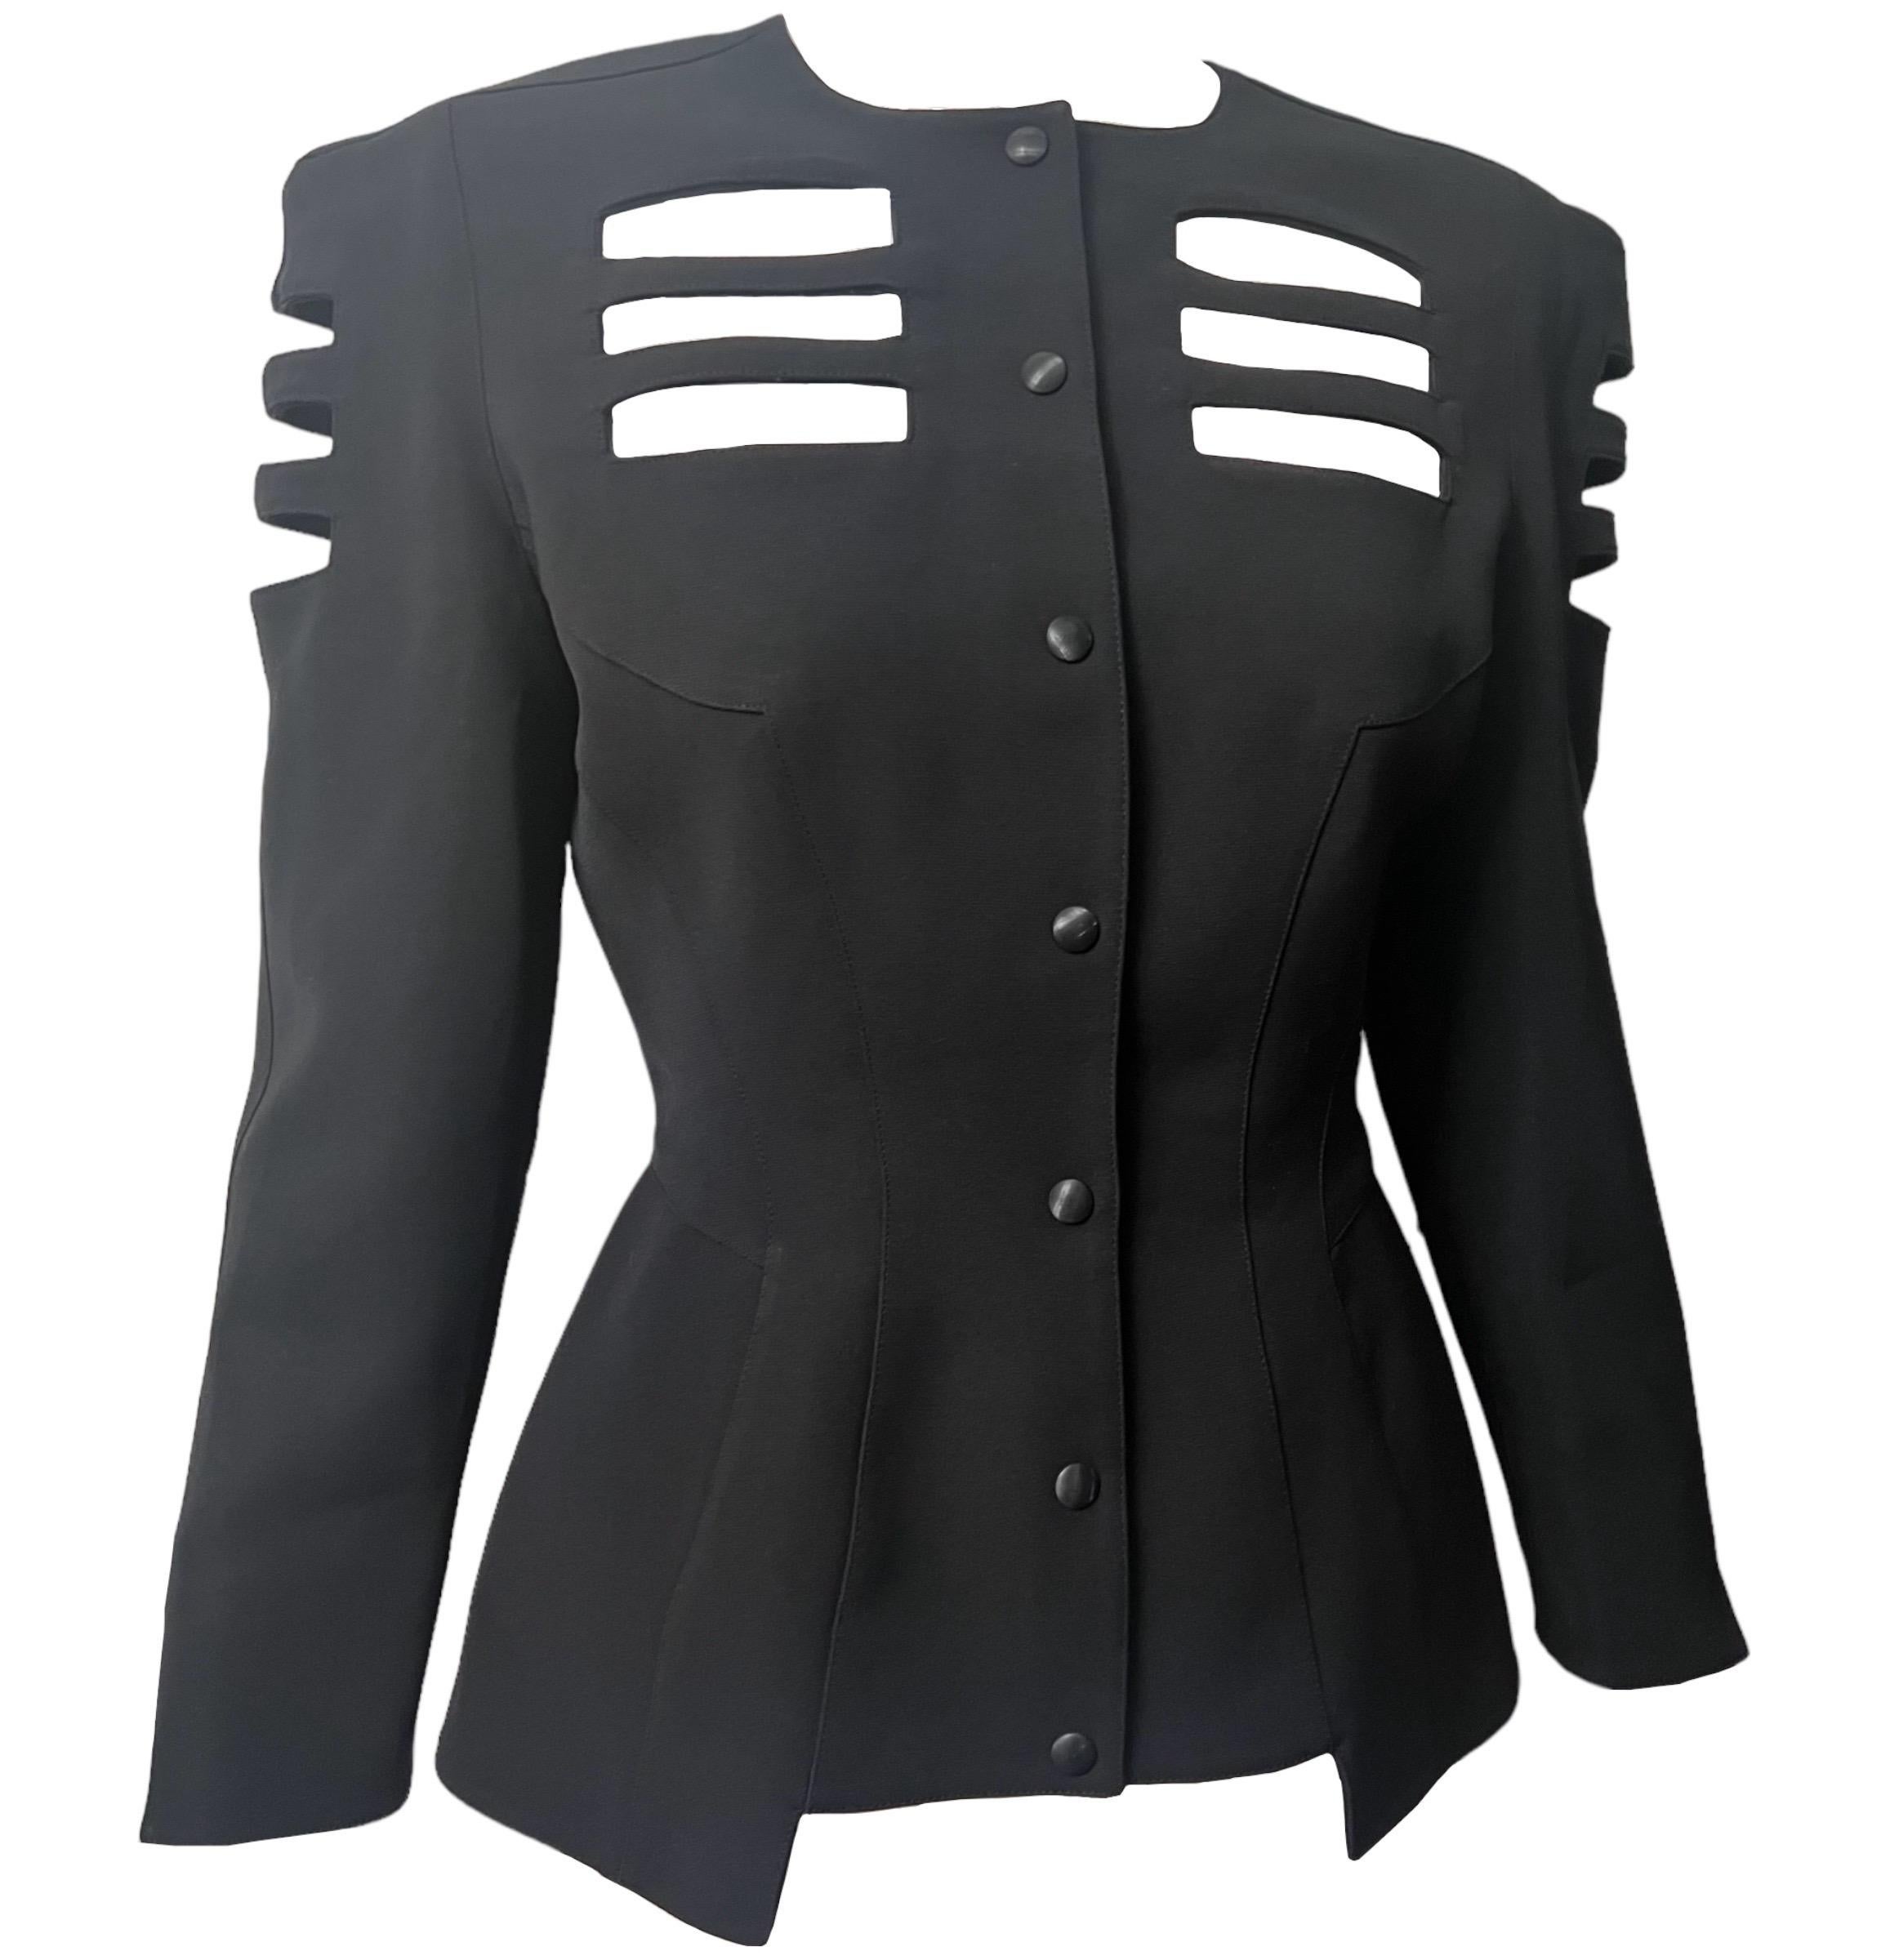 1990’s Thierry Mugler Black jacket with triple rows of rectangular cutouts on the chest, upper arms, and center back. 
Square neckline.
Shoulder pads.
Snap front closure.

Condition: In excellent condition throughout, missing size and material tags,